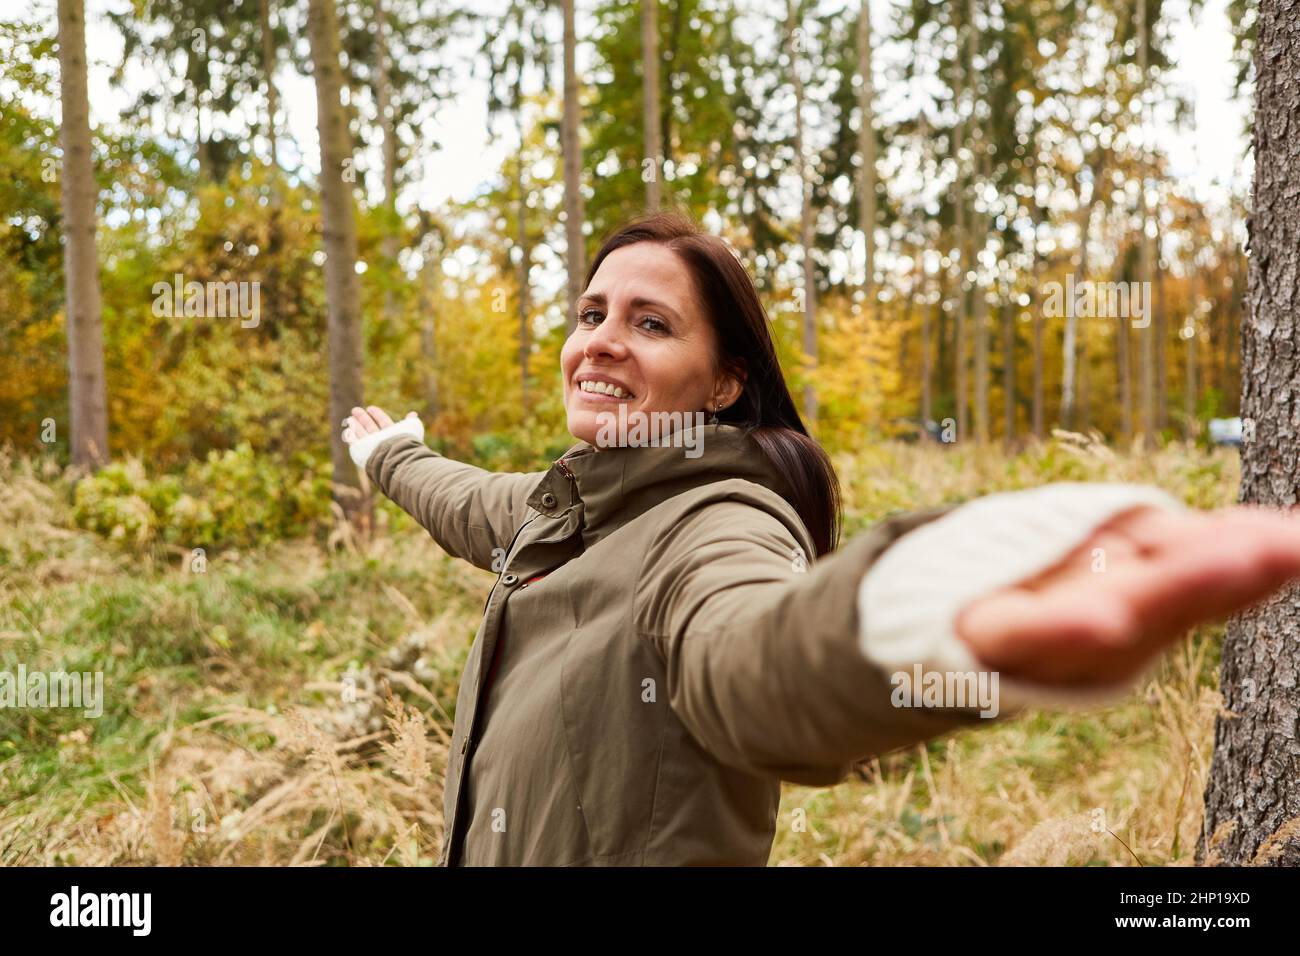 Woman in the forest doing a breathing exercise for relaxation and wellness with her arms outstretched Stock Photo